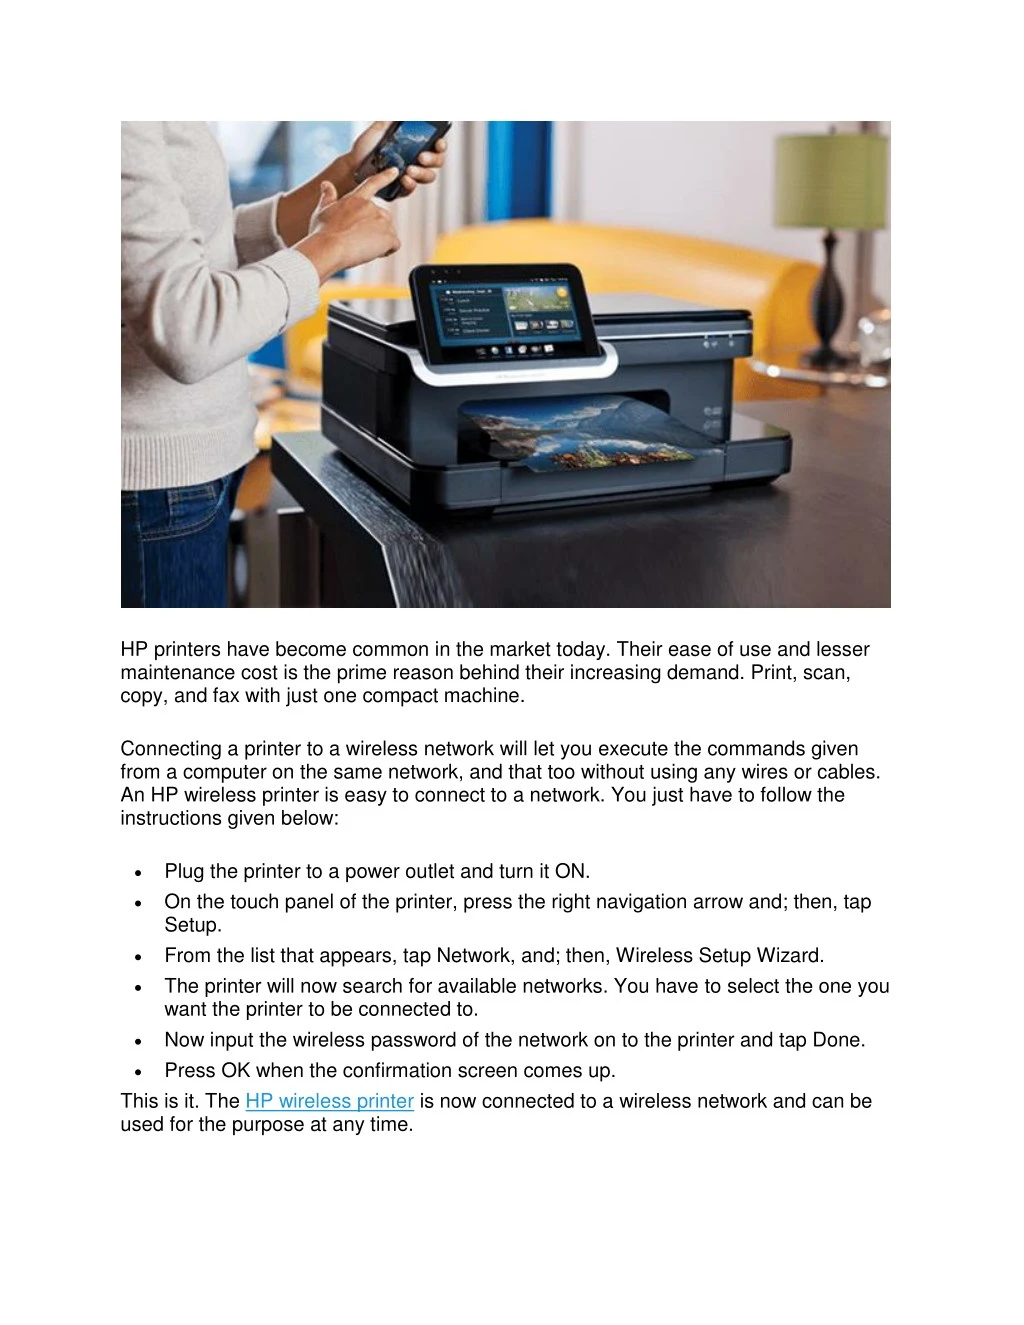 hp printers have become common in the market